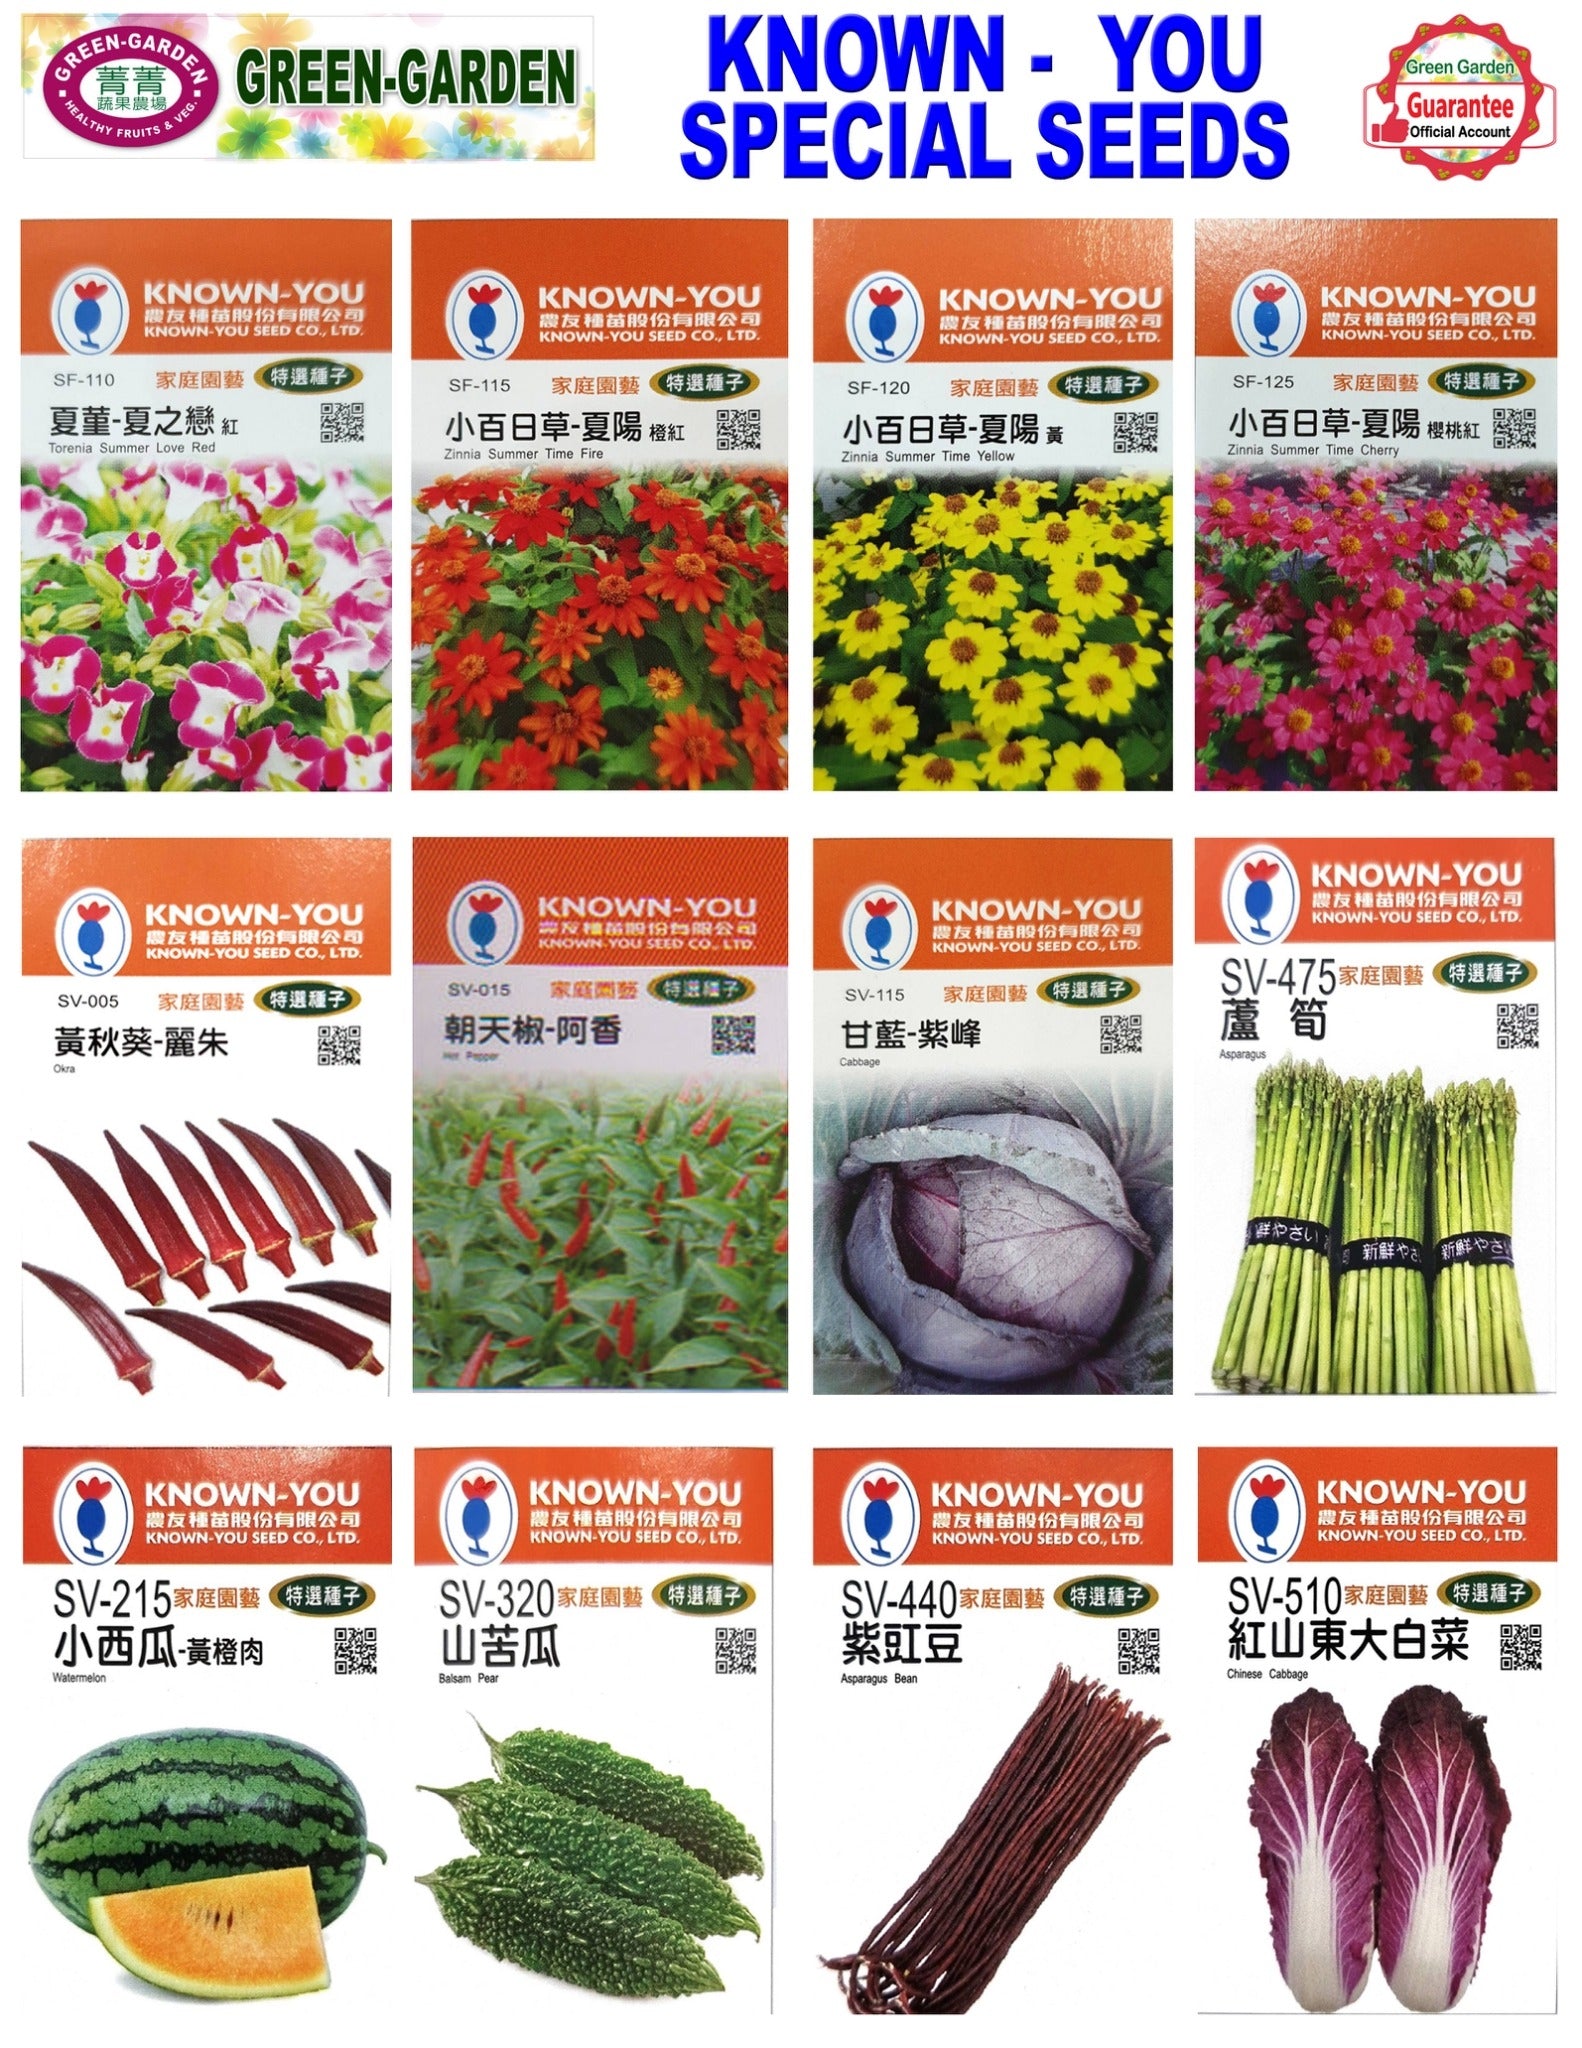 Known You Special Seeds (SV-115 Cabbage (Red))